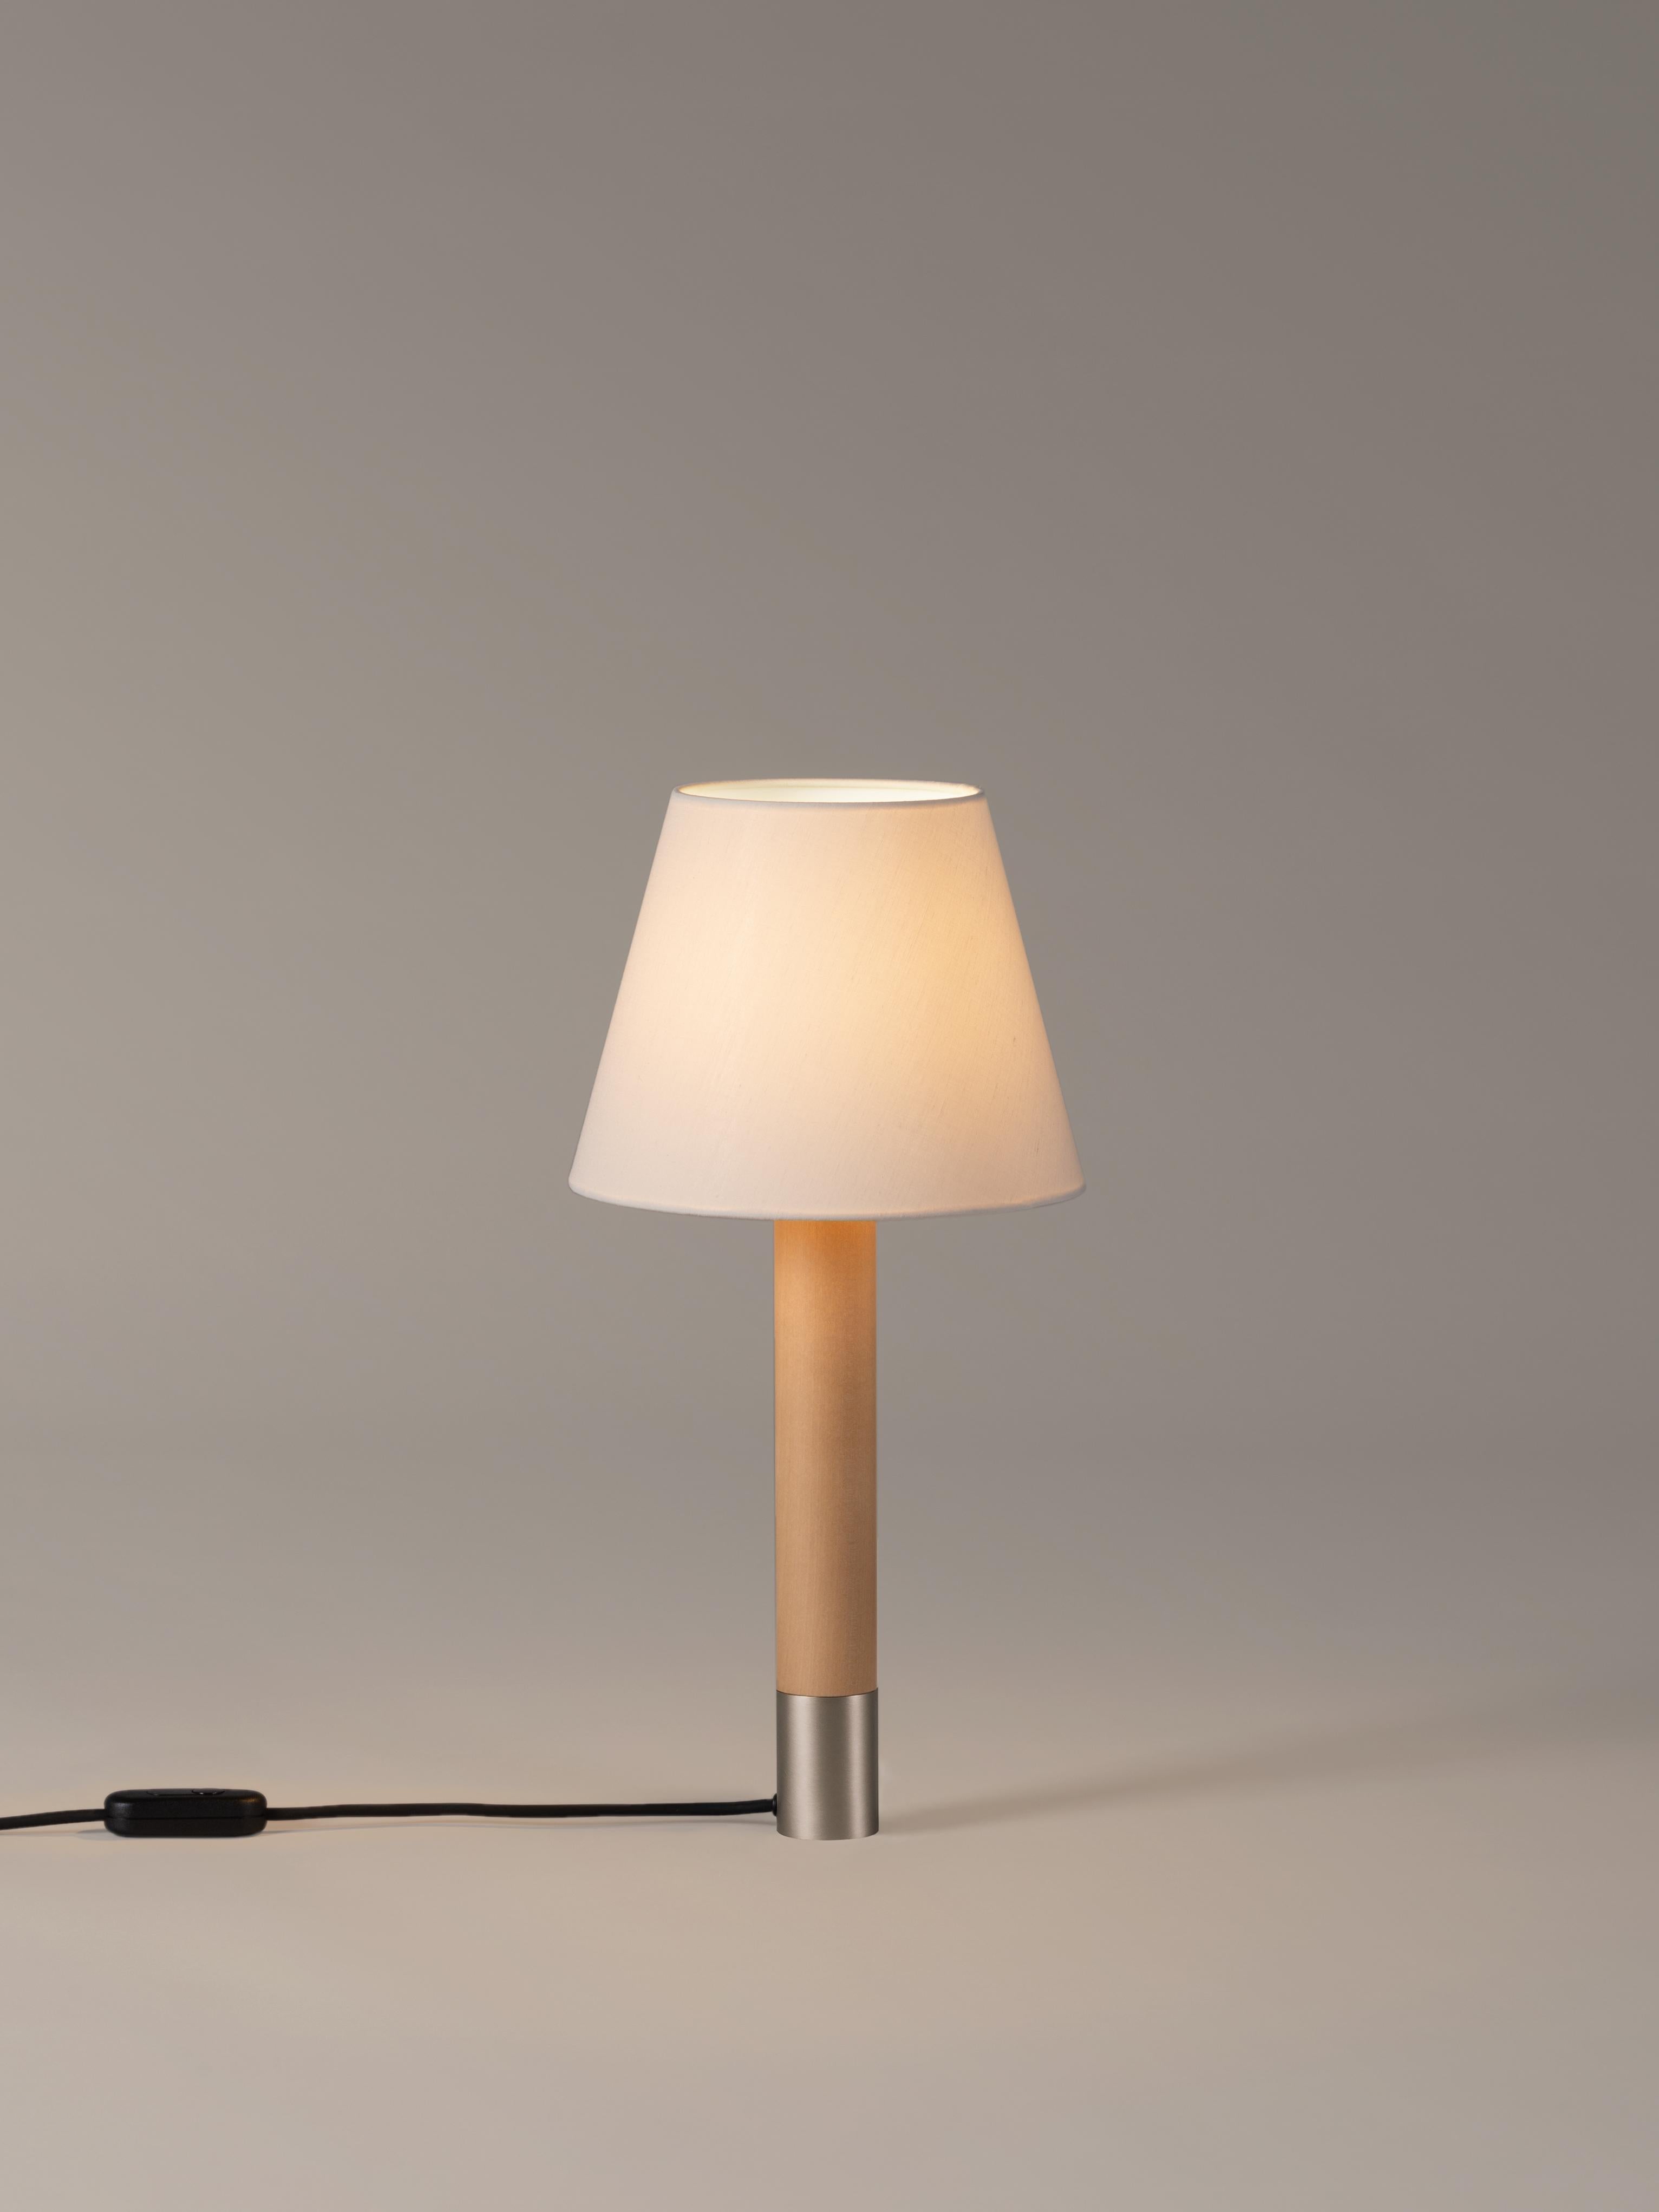 Nickel and White Básica M1 table lamp by Santiago Roqueta, Santa & Cole.
Dimensions: D 25 x H 52 cm
Materials: Nickel, birch wood, linen.
Available in other shade colors and with or without the stabilizing disc.
Available in nickel or